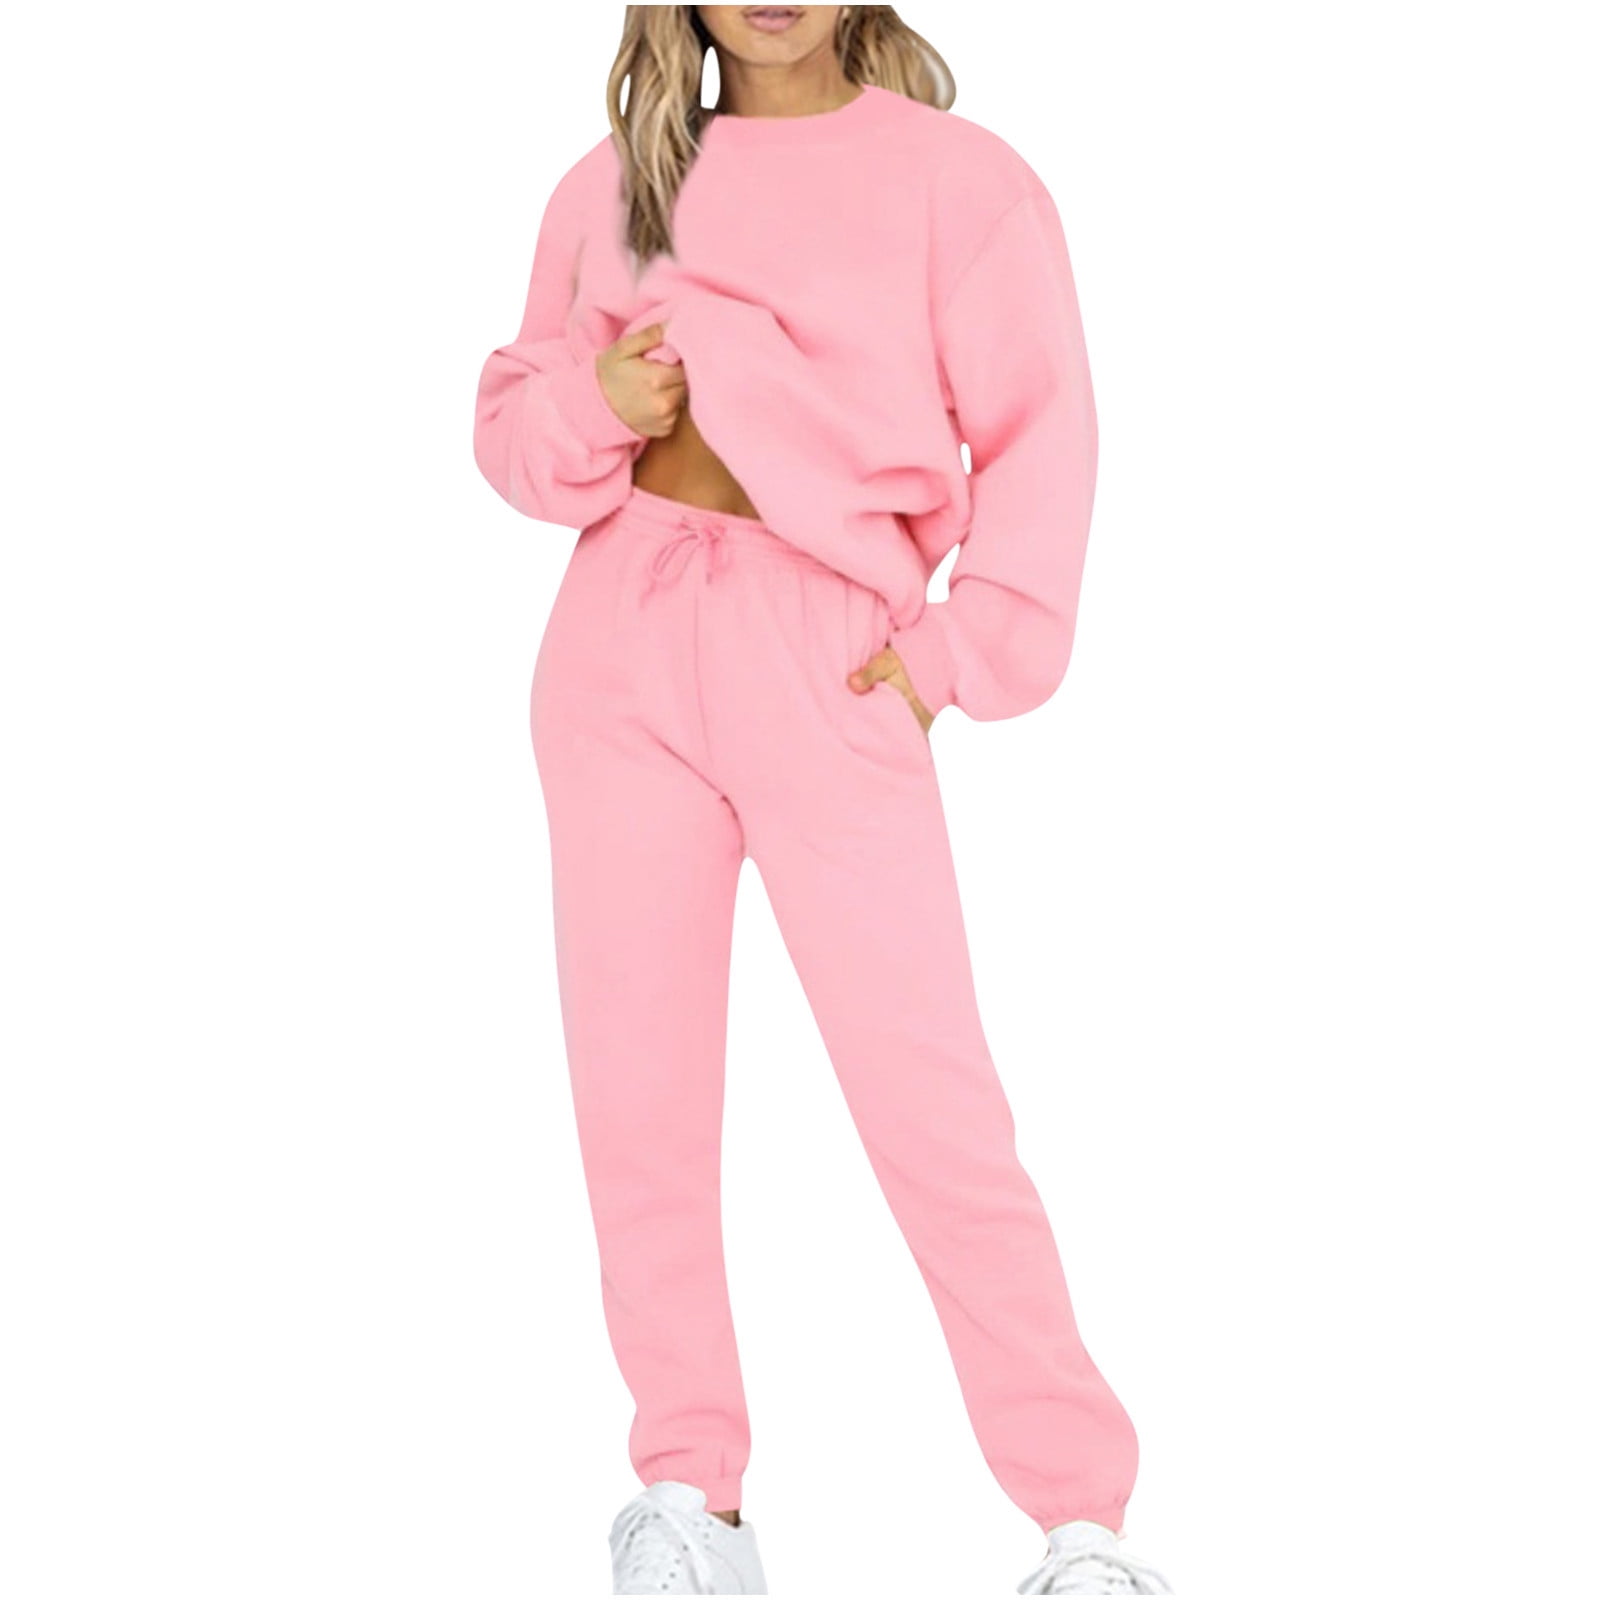 Sweatsuits for Women Oversized Crewneck Sweatshirts Sweatpants Outfits  Loose-Fit Comfy Solid Casual Track Suits 